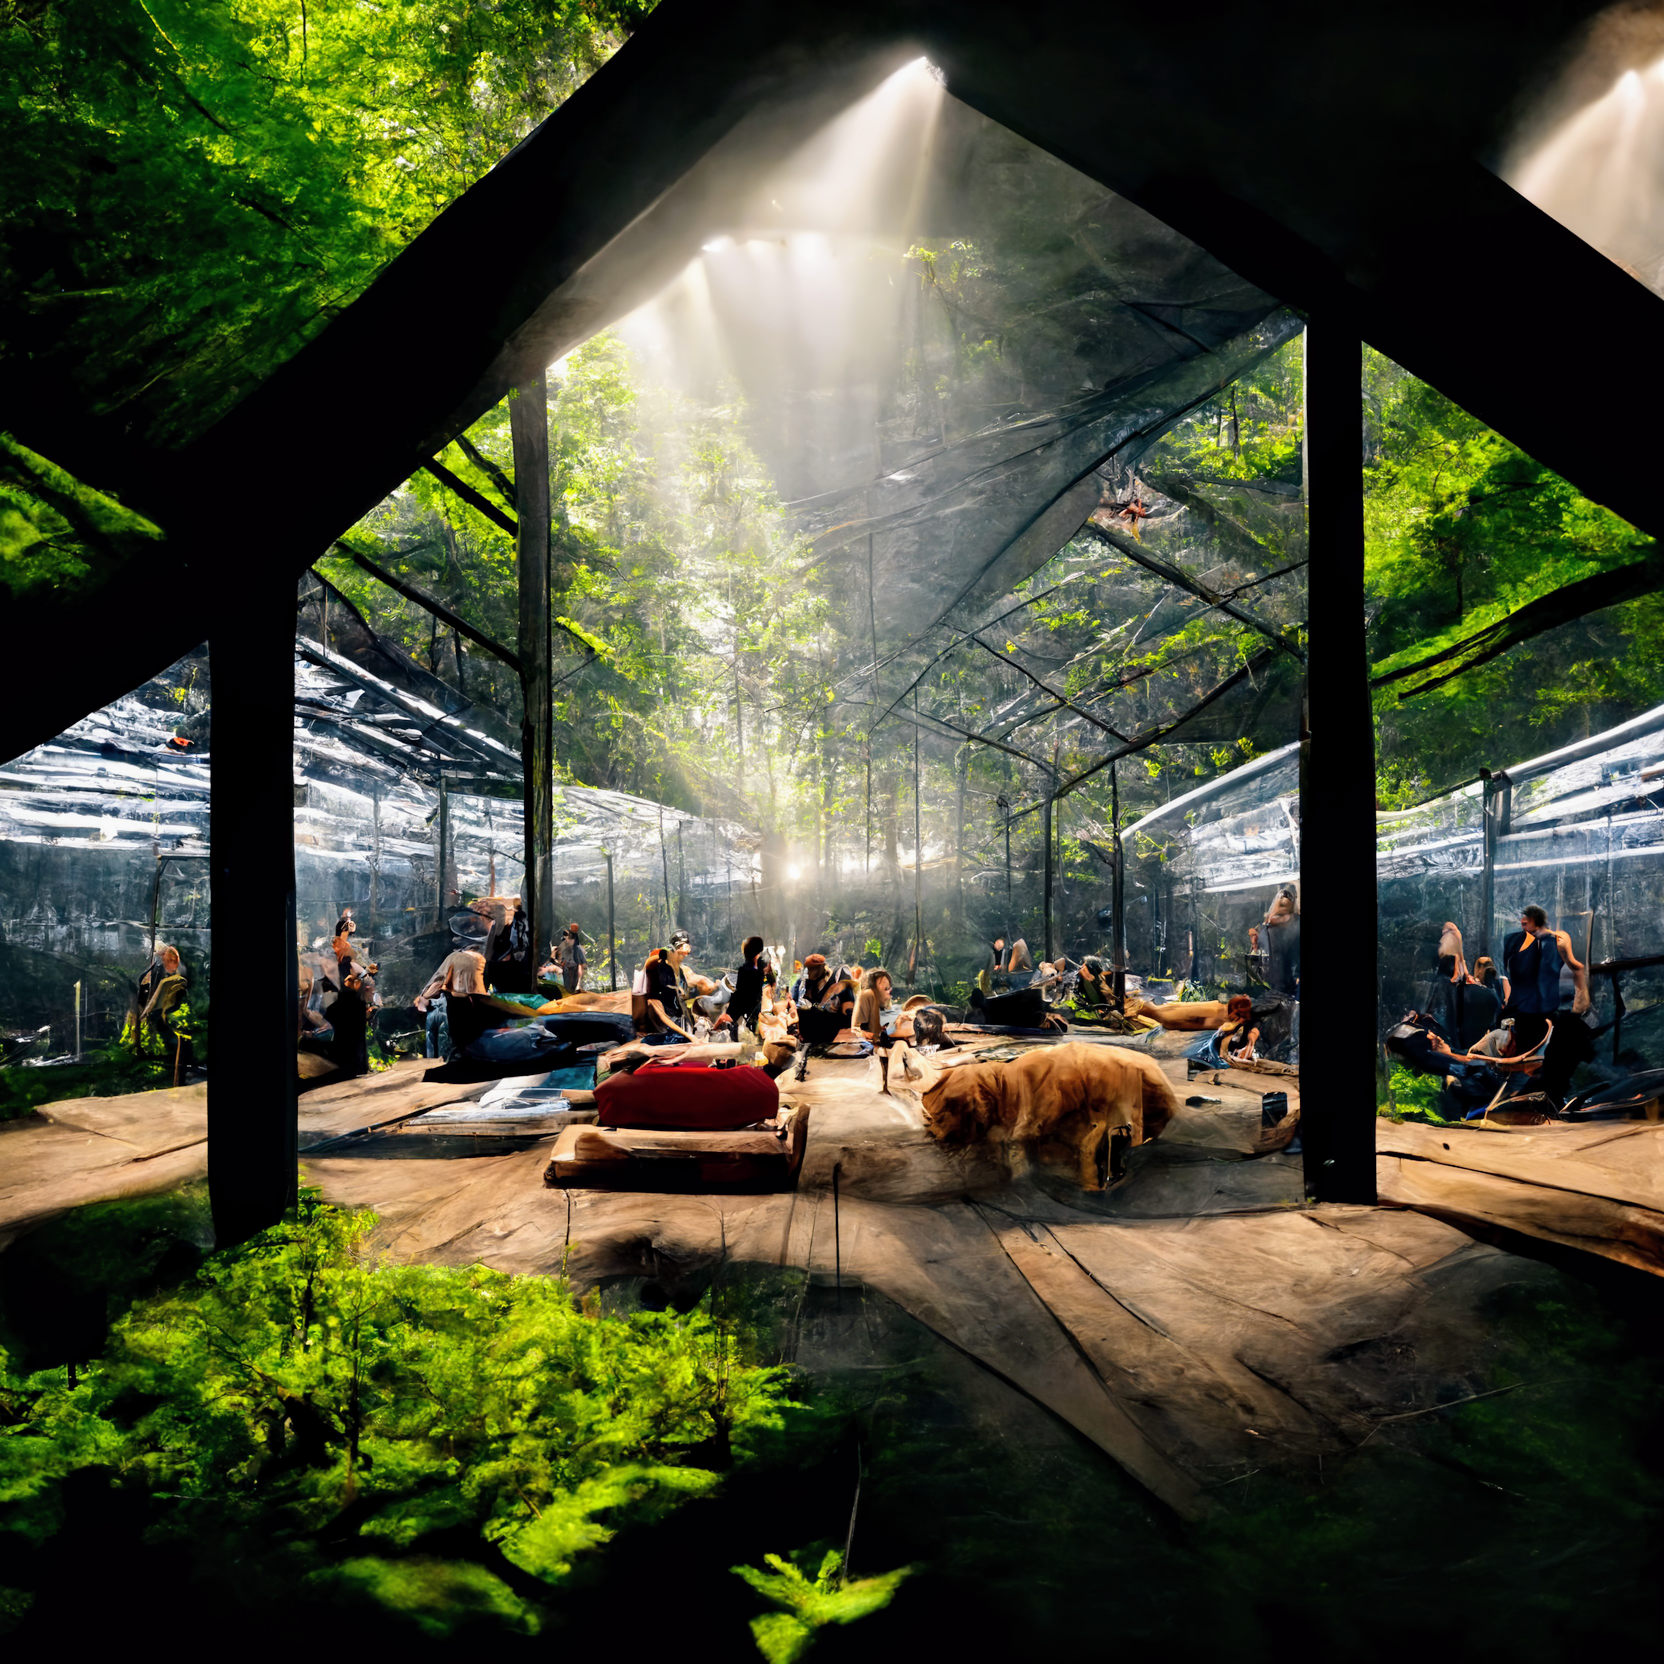 The city as a forest. What would it take to live with a forest? With the pace of current AI models shouldn’t we expect an exponential increase in research on new materials, construction methods and alternative living? Image by Daniel Koehler.